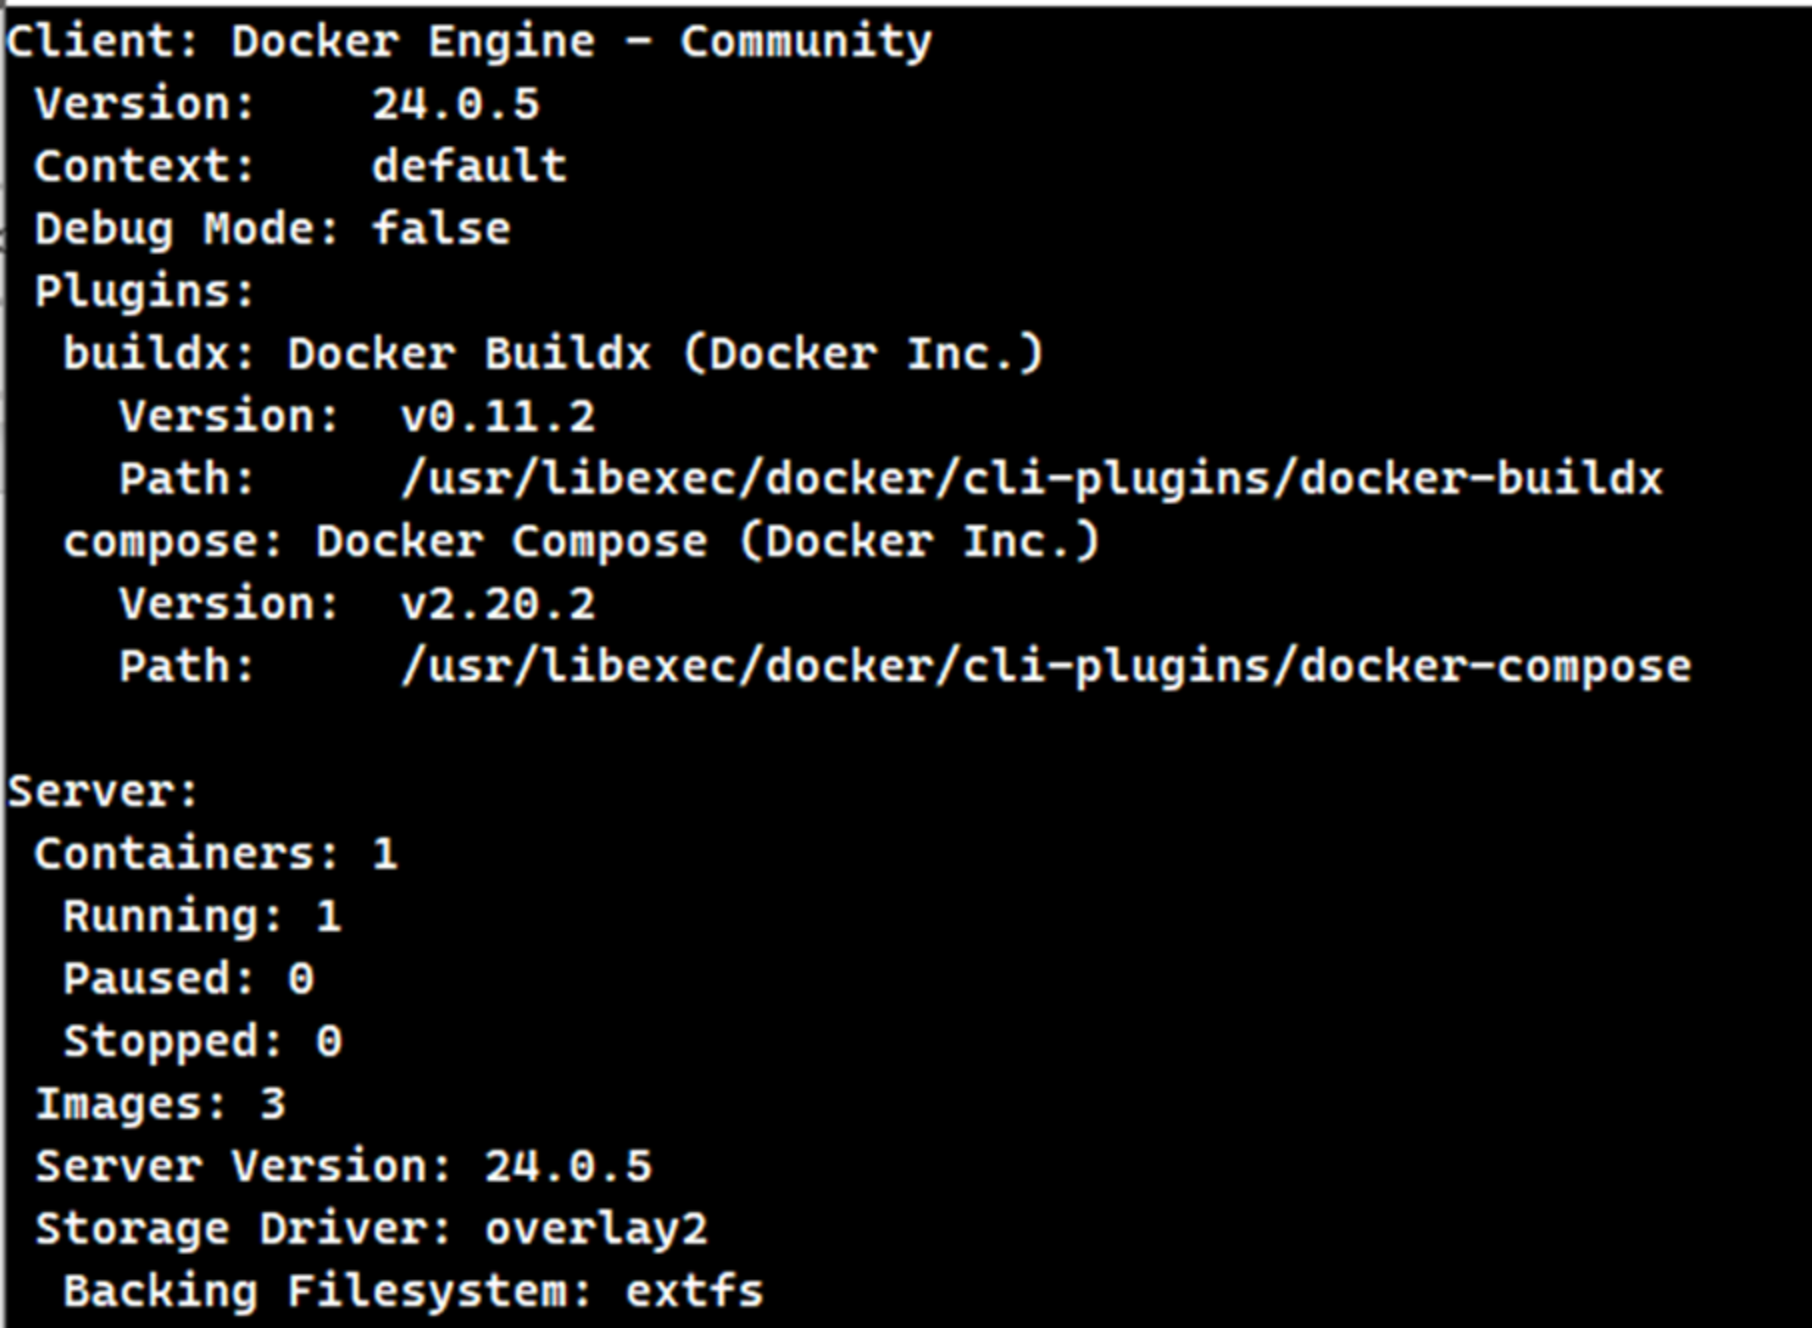 Code and output of the docker info command